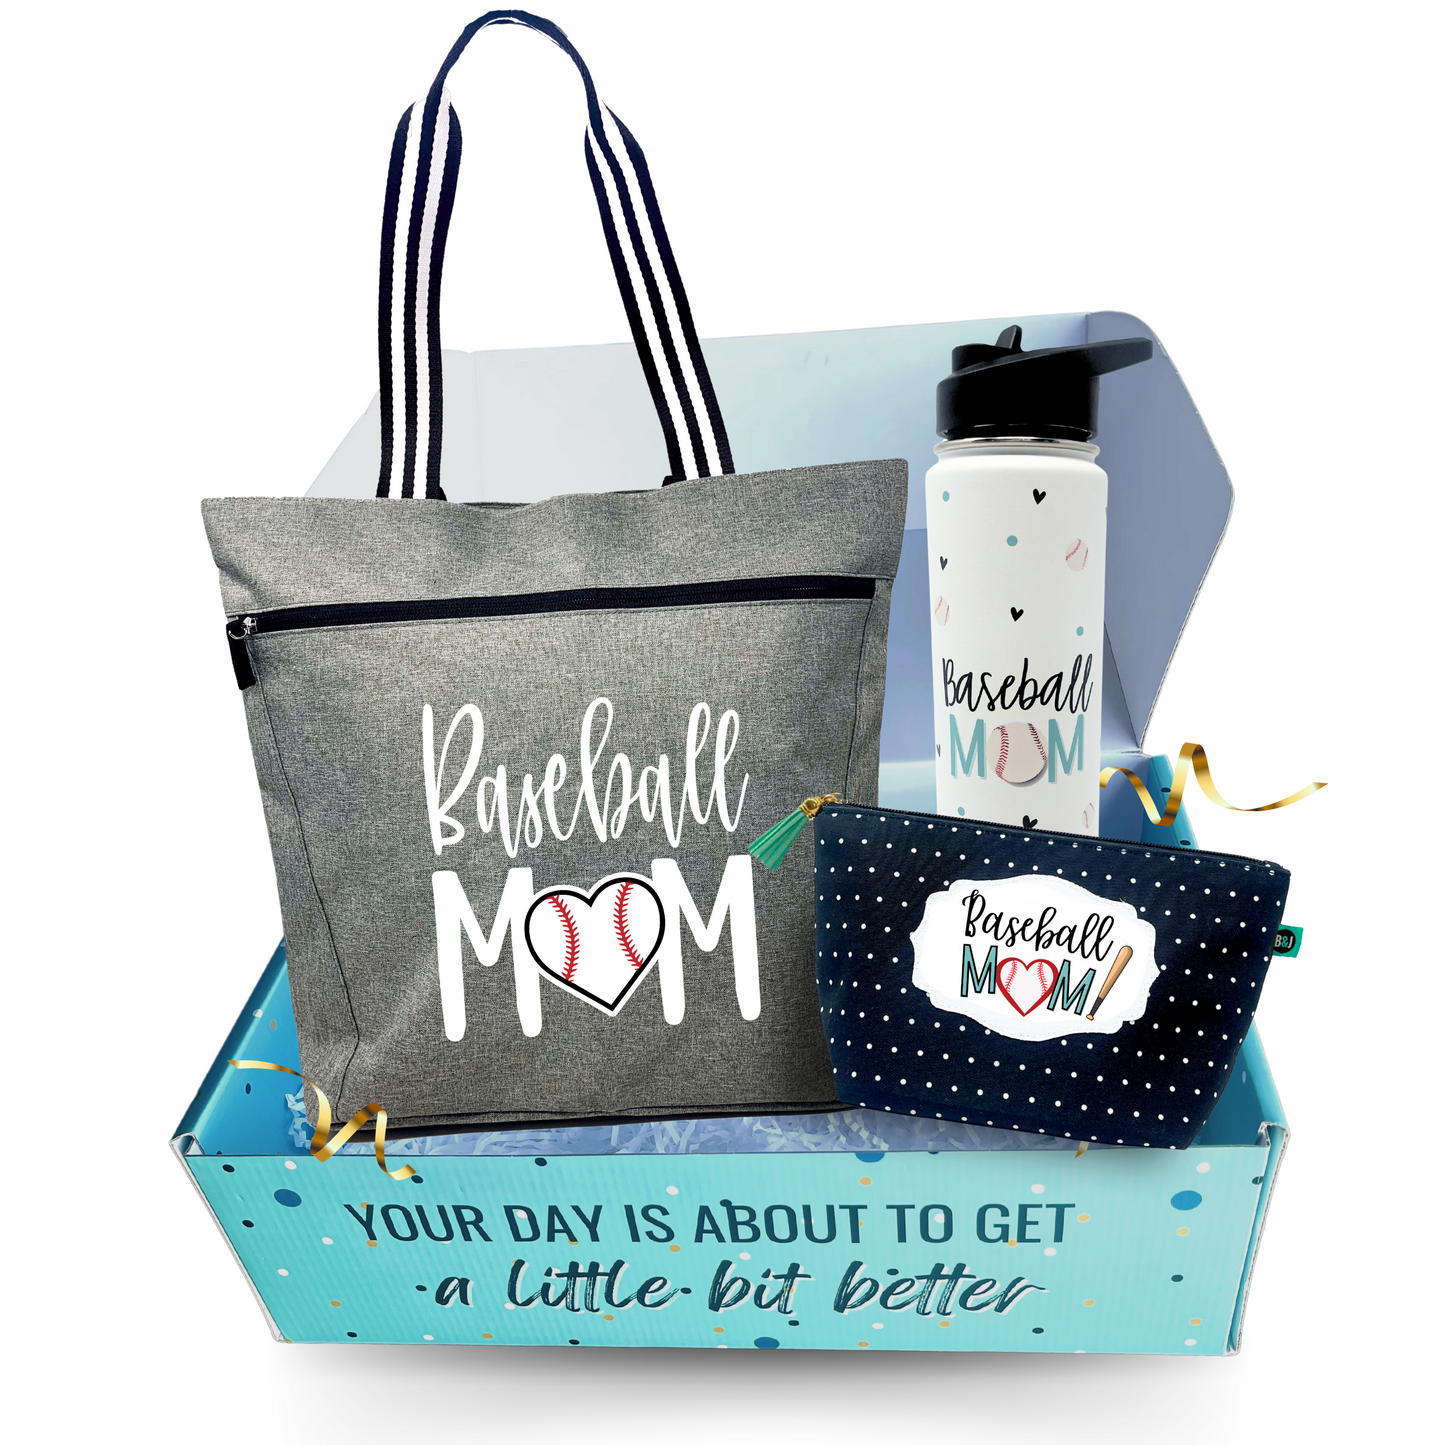 Brooke and Jess Designs - Baseball Mom Lexie Gray Tote Bag, 24 oz Waterbottle Tumbler, and Janie Makeup Cosmetic Bag Gift Box Set